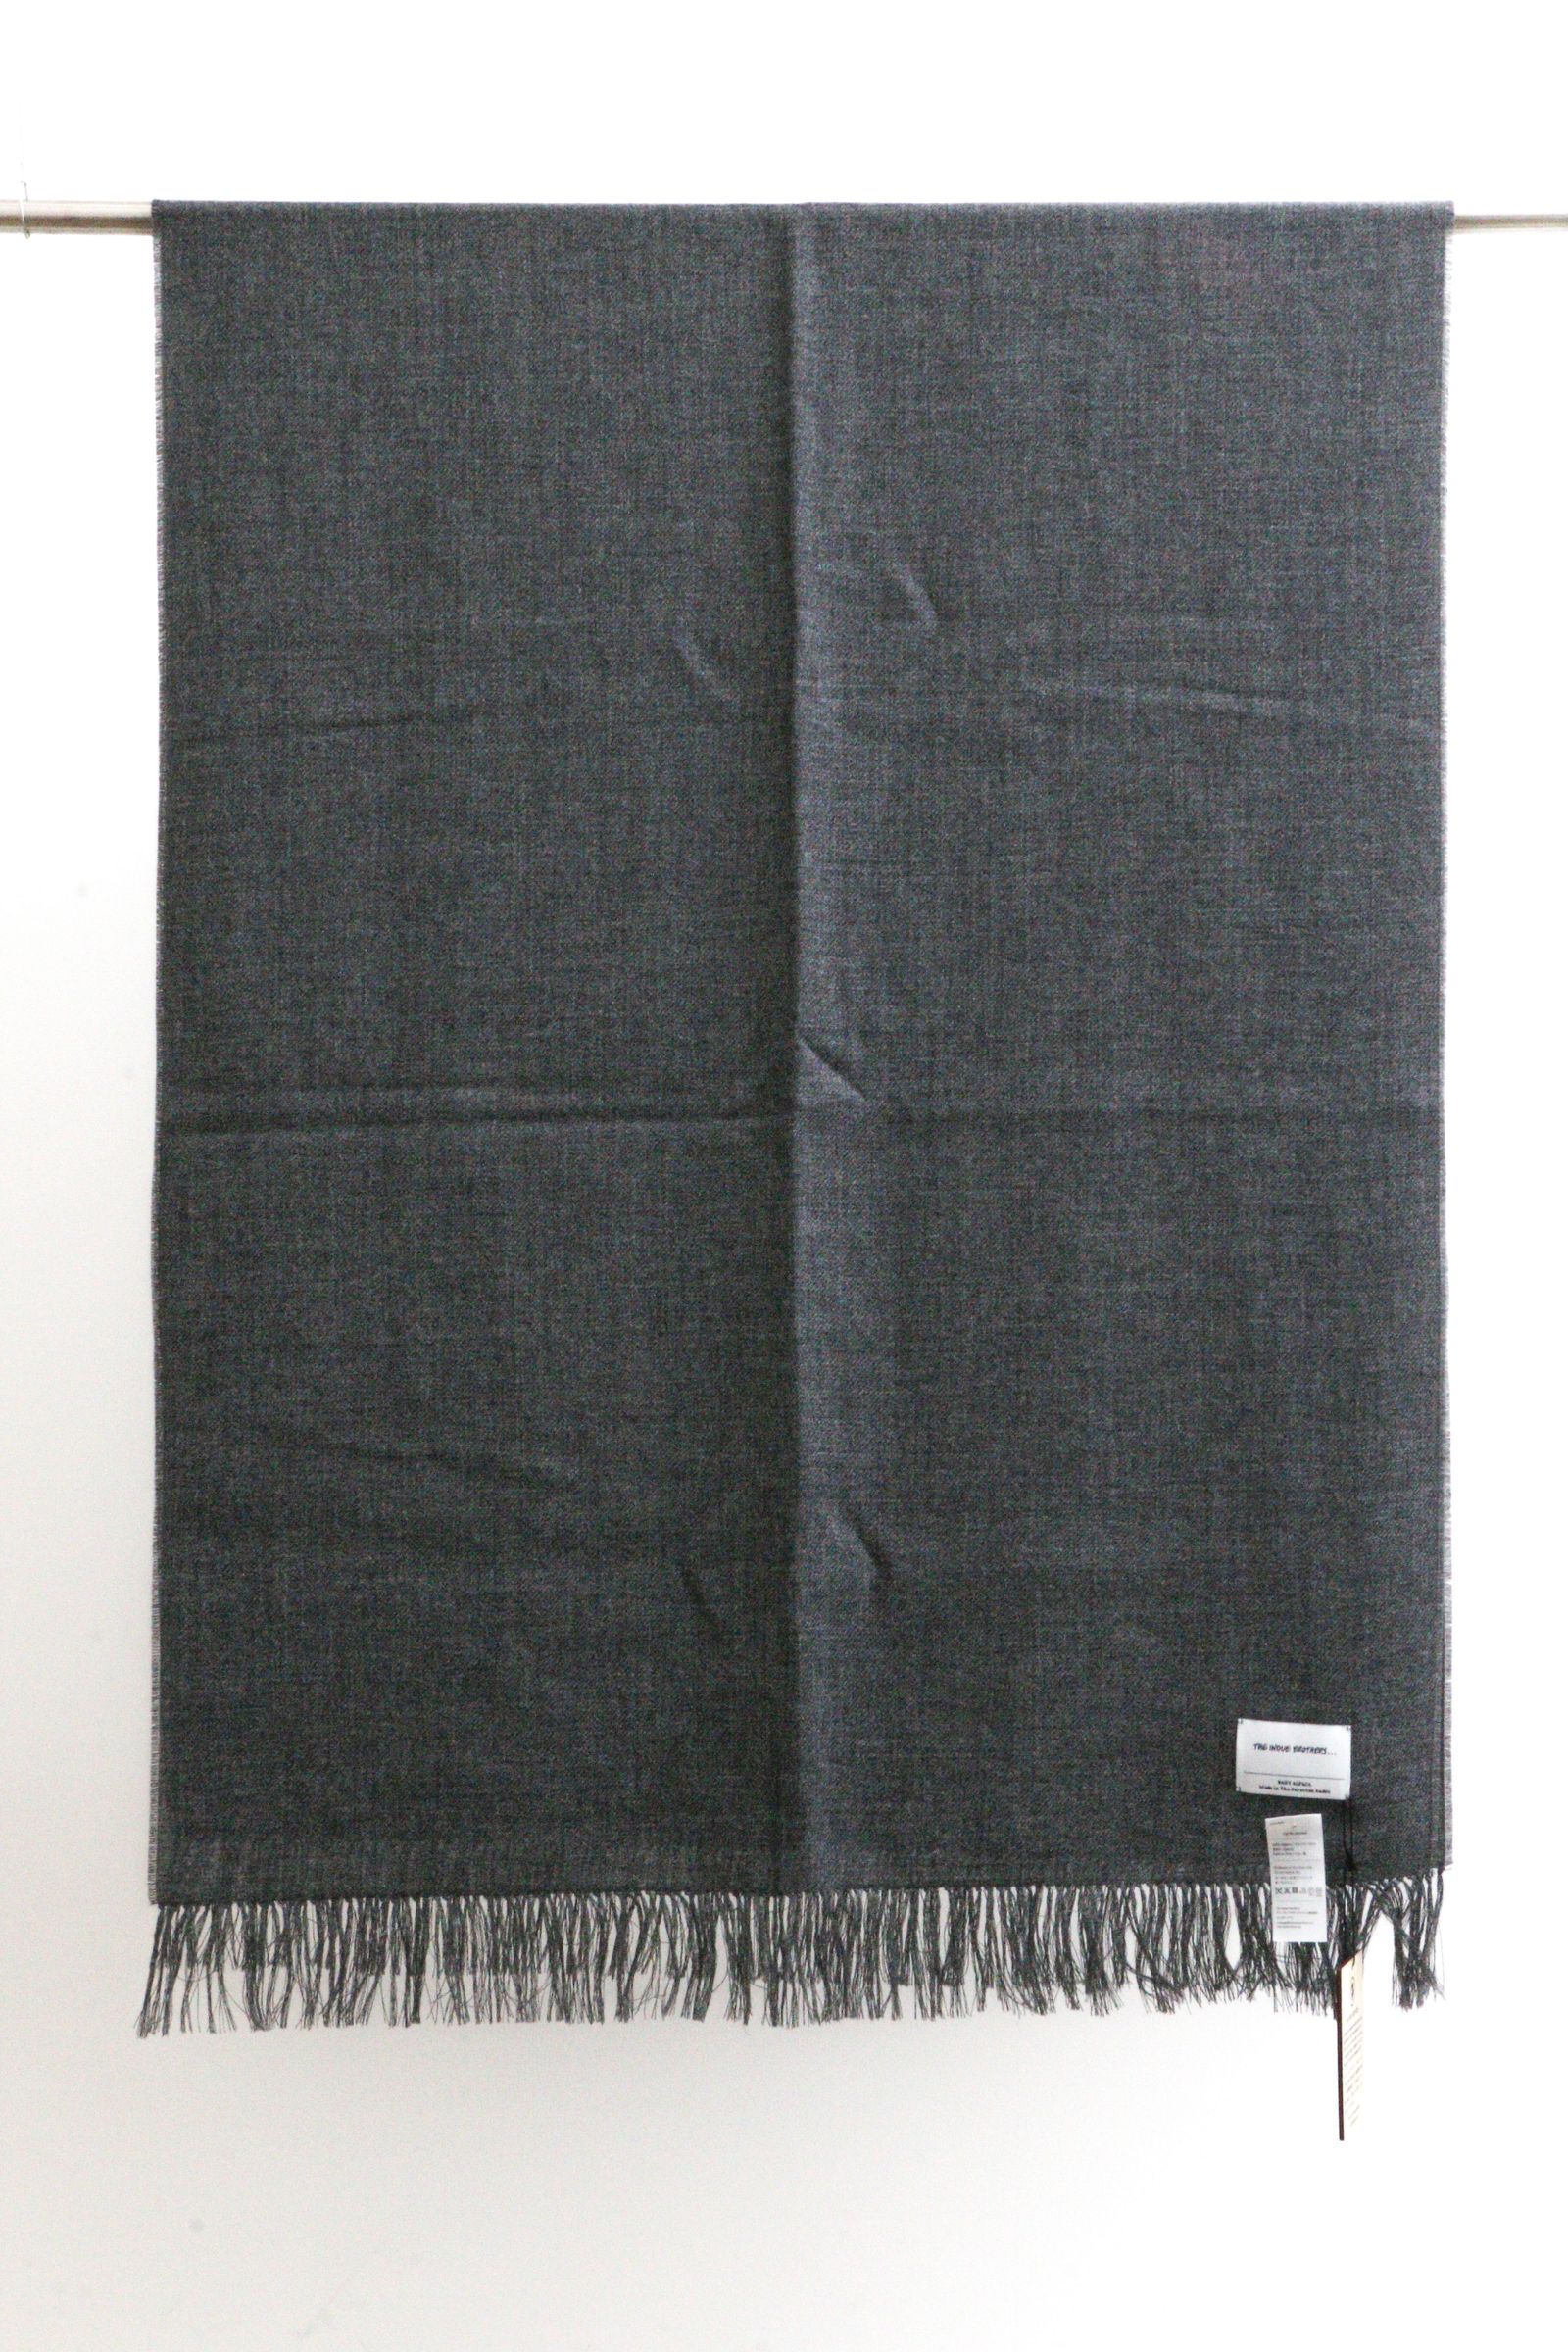 THE INOUE BROTHERS - Non Brushed Large Stole Grey / 大判ストール 